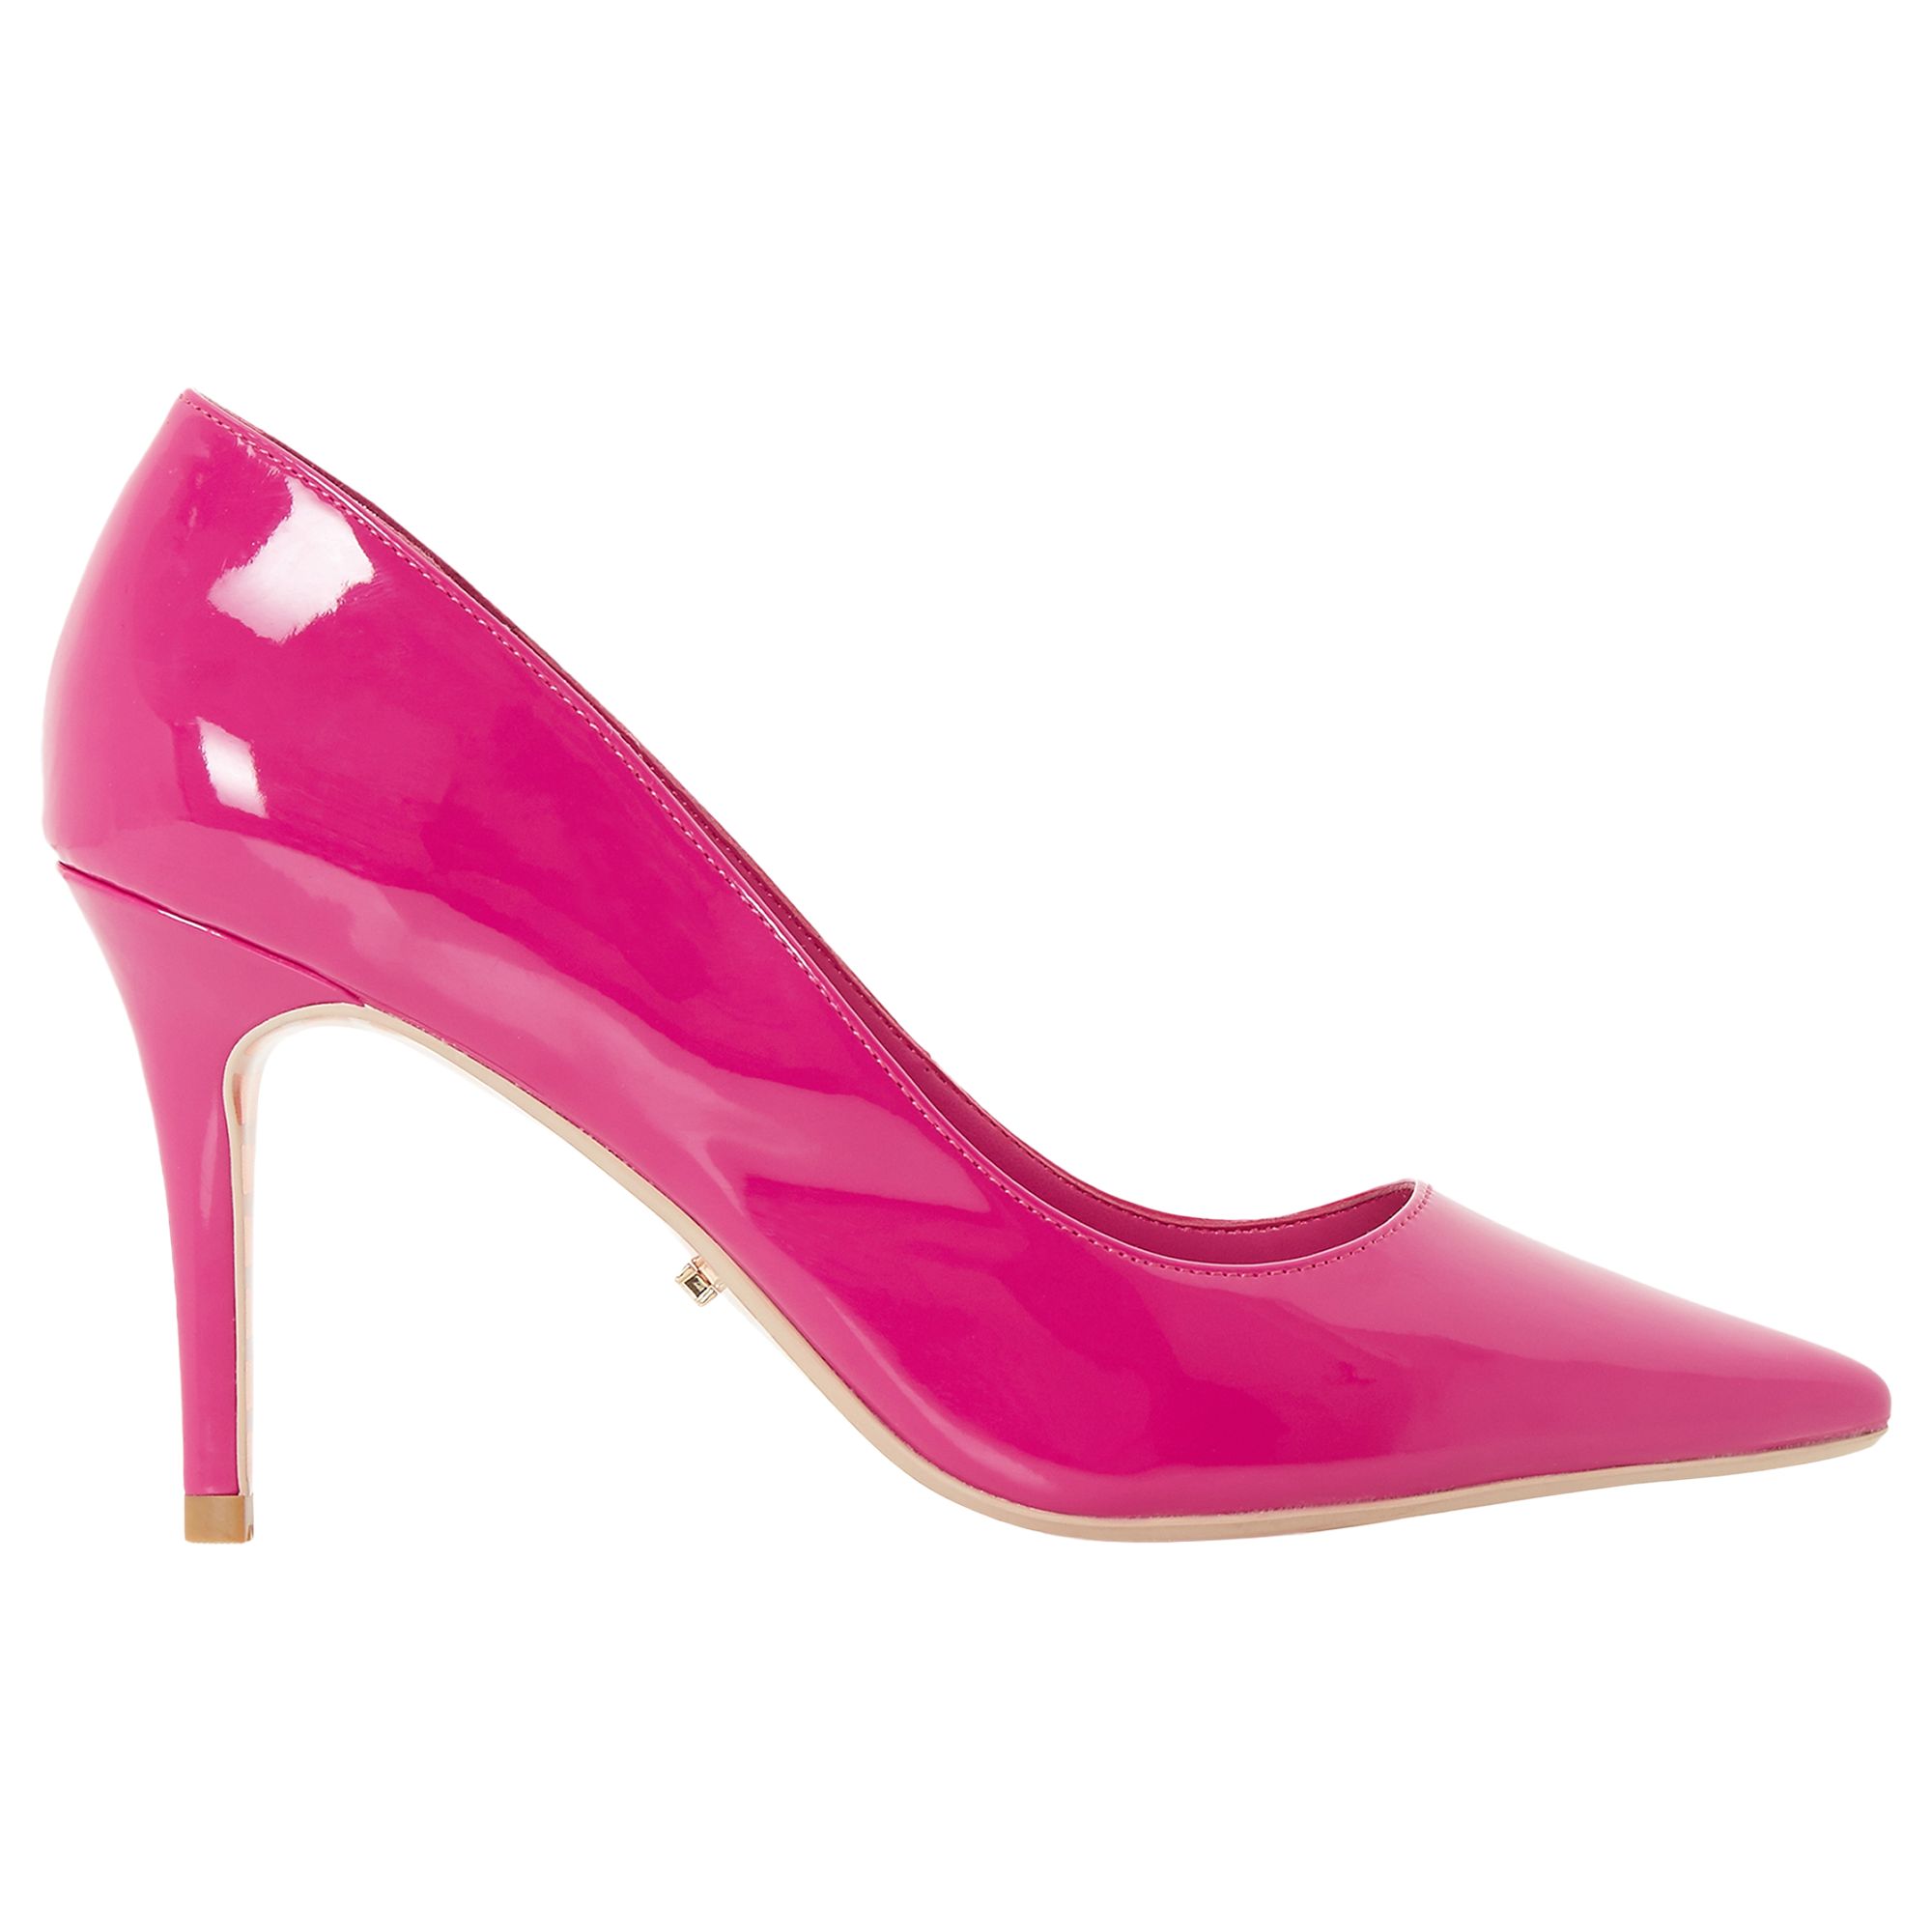 Dune Aurrora Pointed Toe Court Shoes, Pink, 8